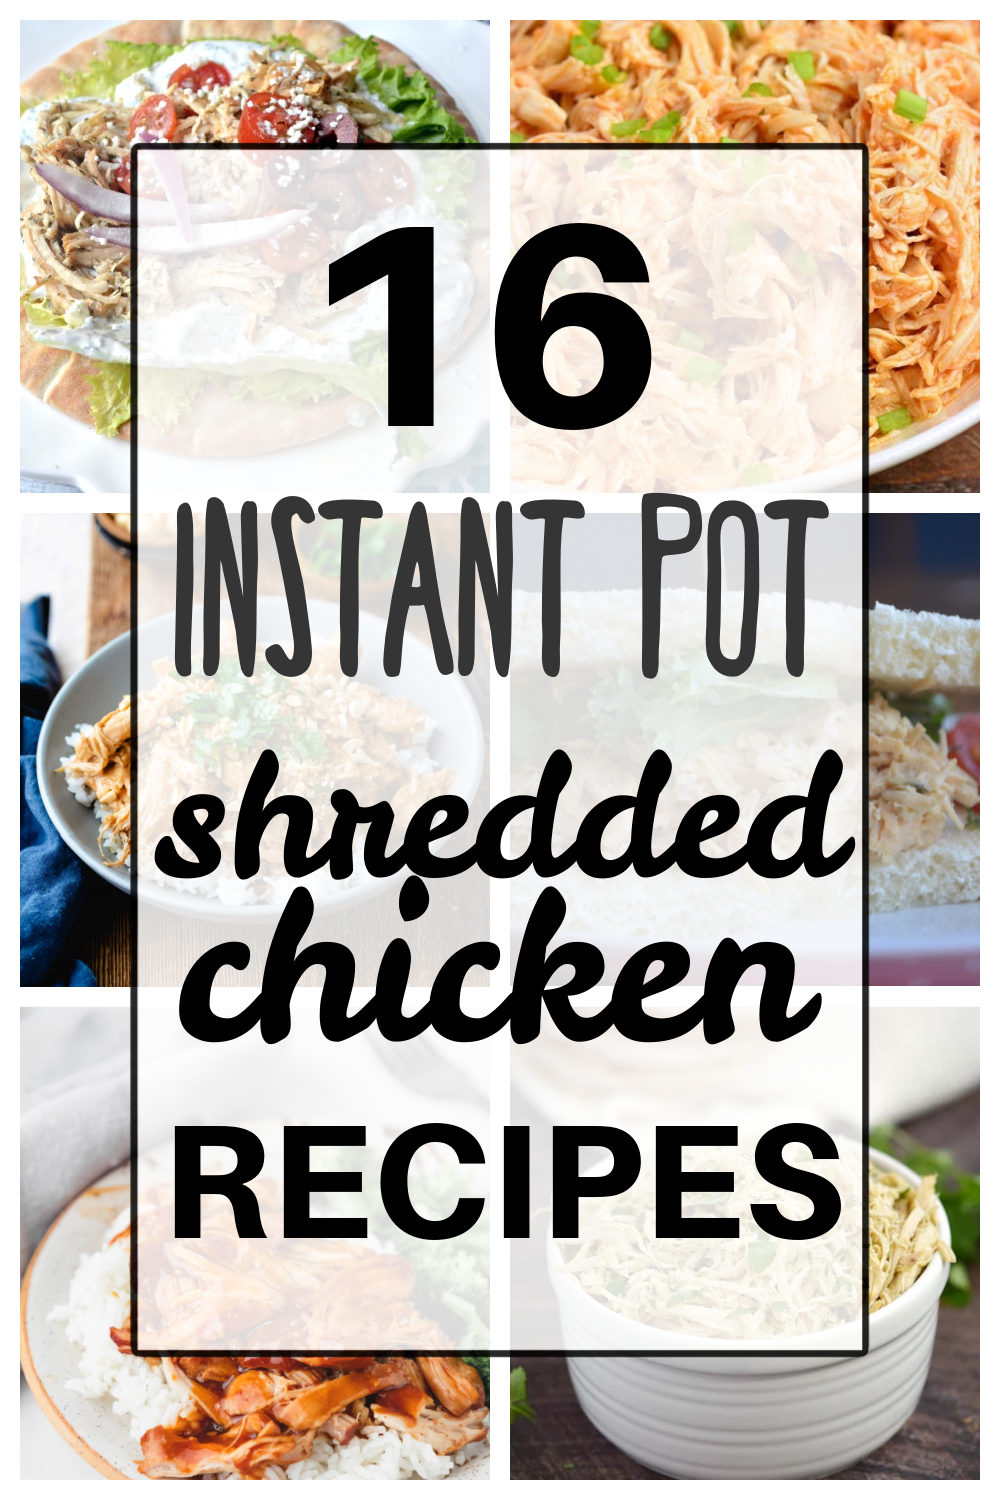 16 Instant Pot Shredded Chicken Recipes - Make the Best of Everything